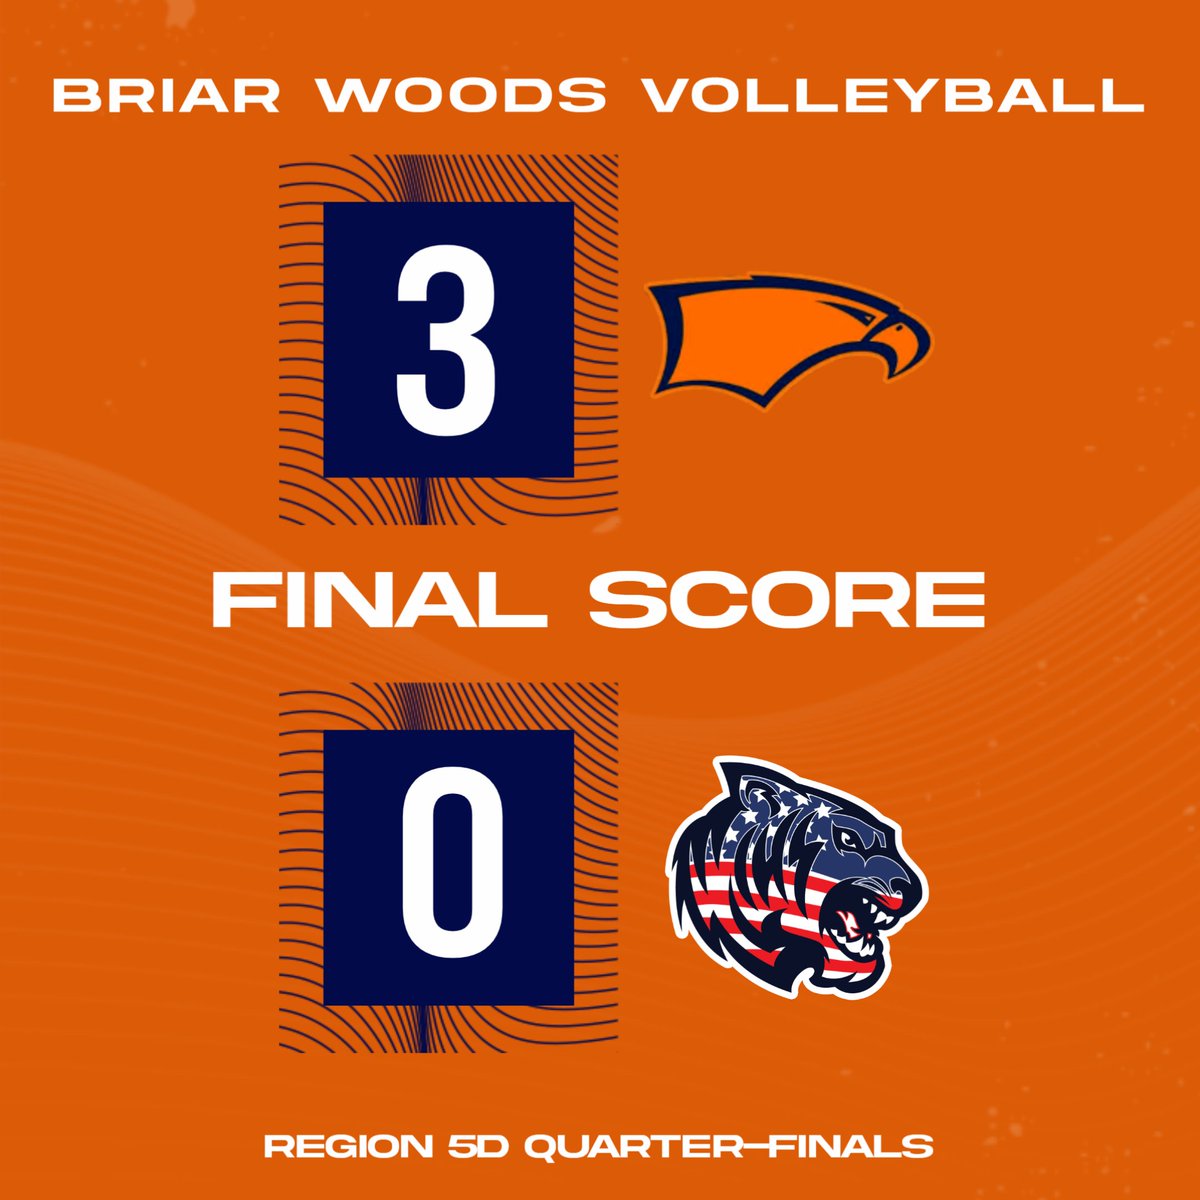 VB advances to Region Semi-Finals with the win over Indy! The Falcons will play at Riverbend on Thursday.